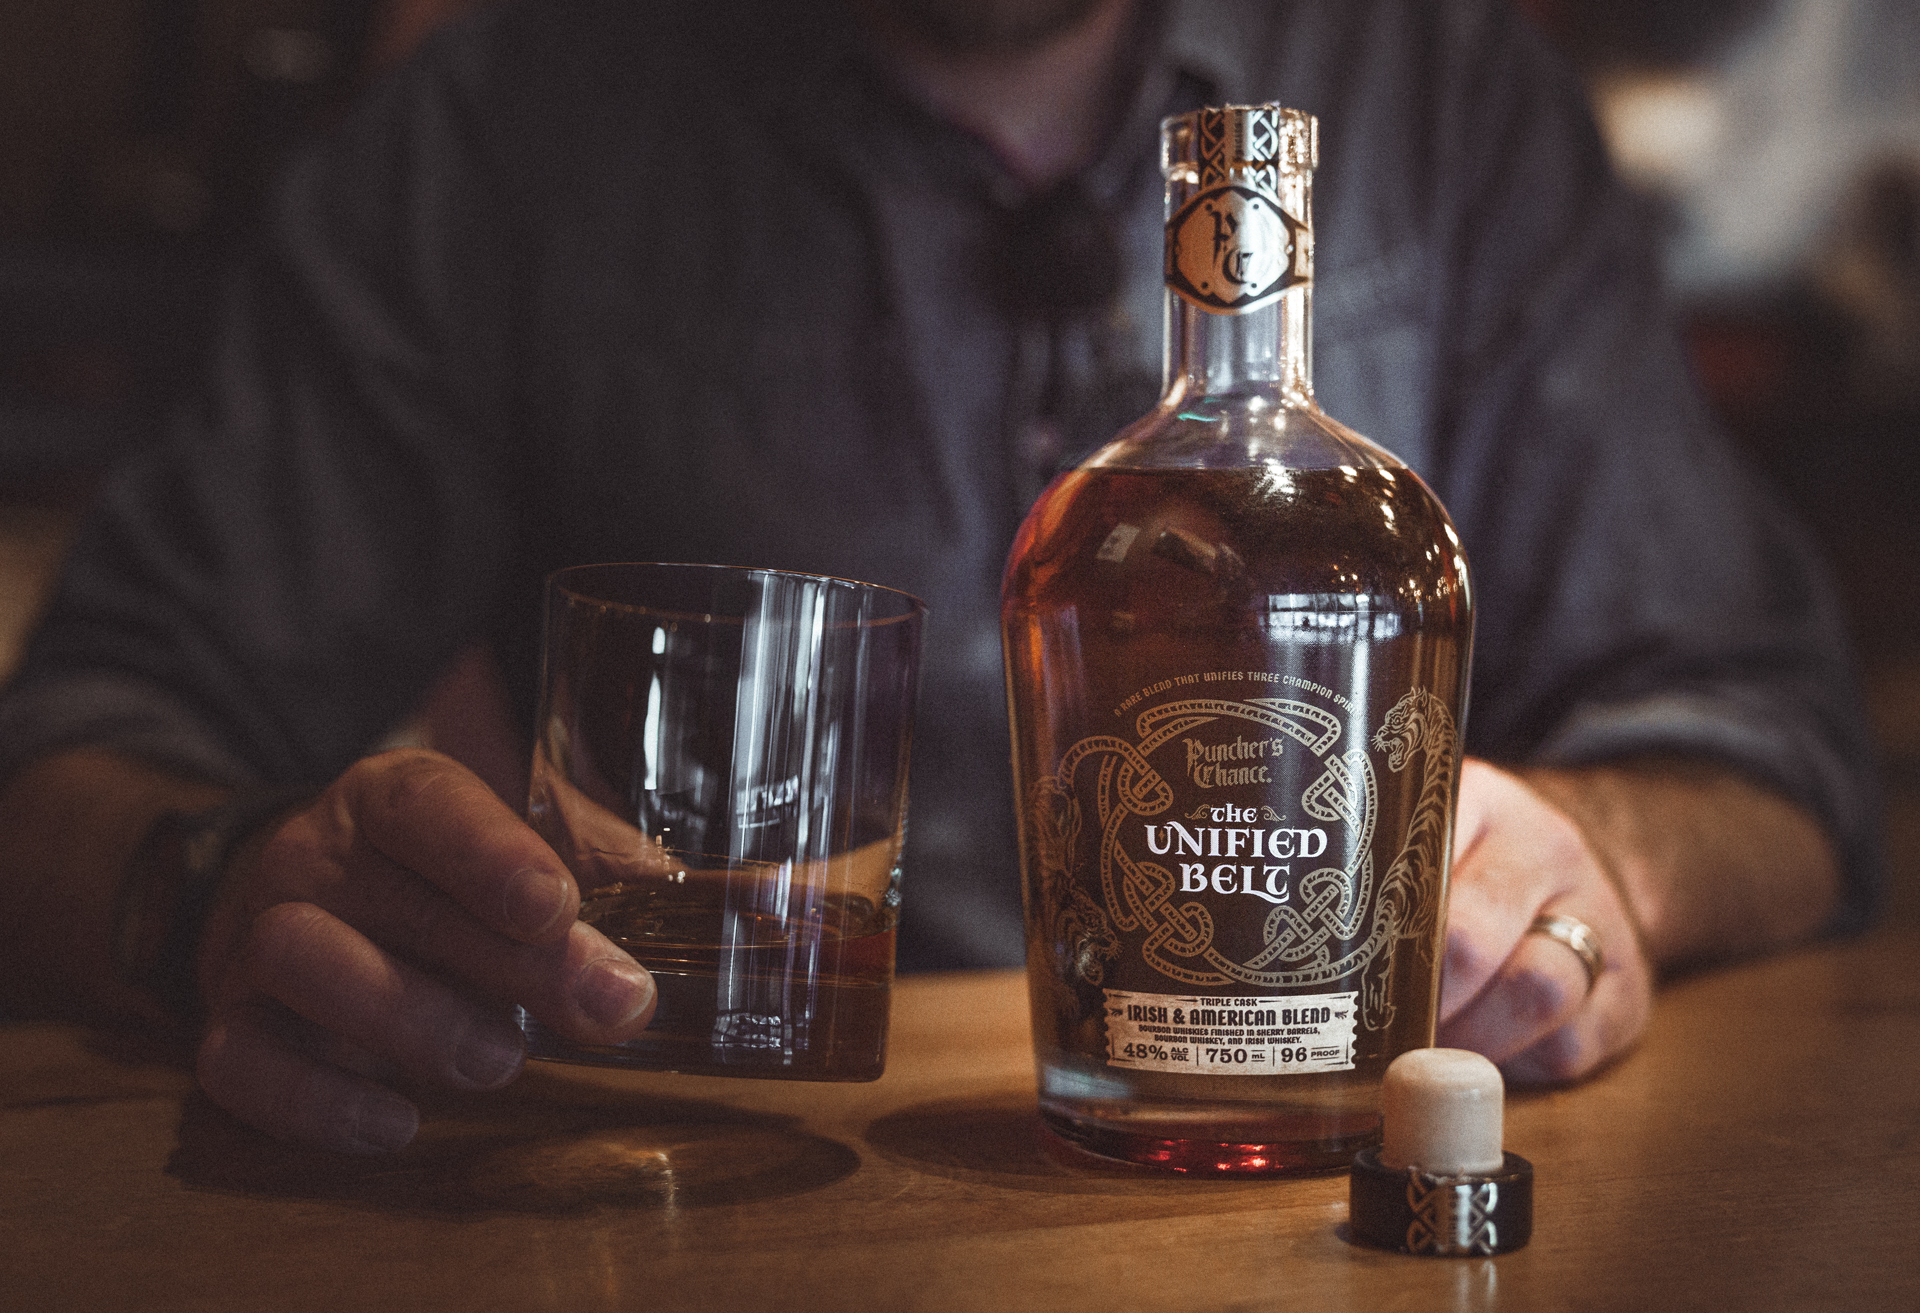 Puncher’s Chance Introduces The Unified Belt, A New Blend of Bourbon and Irish Whiskey